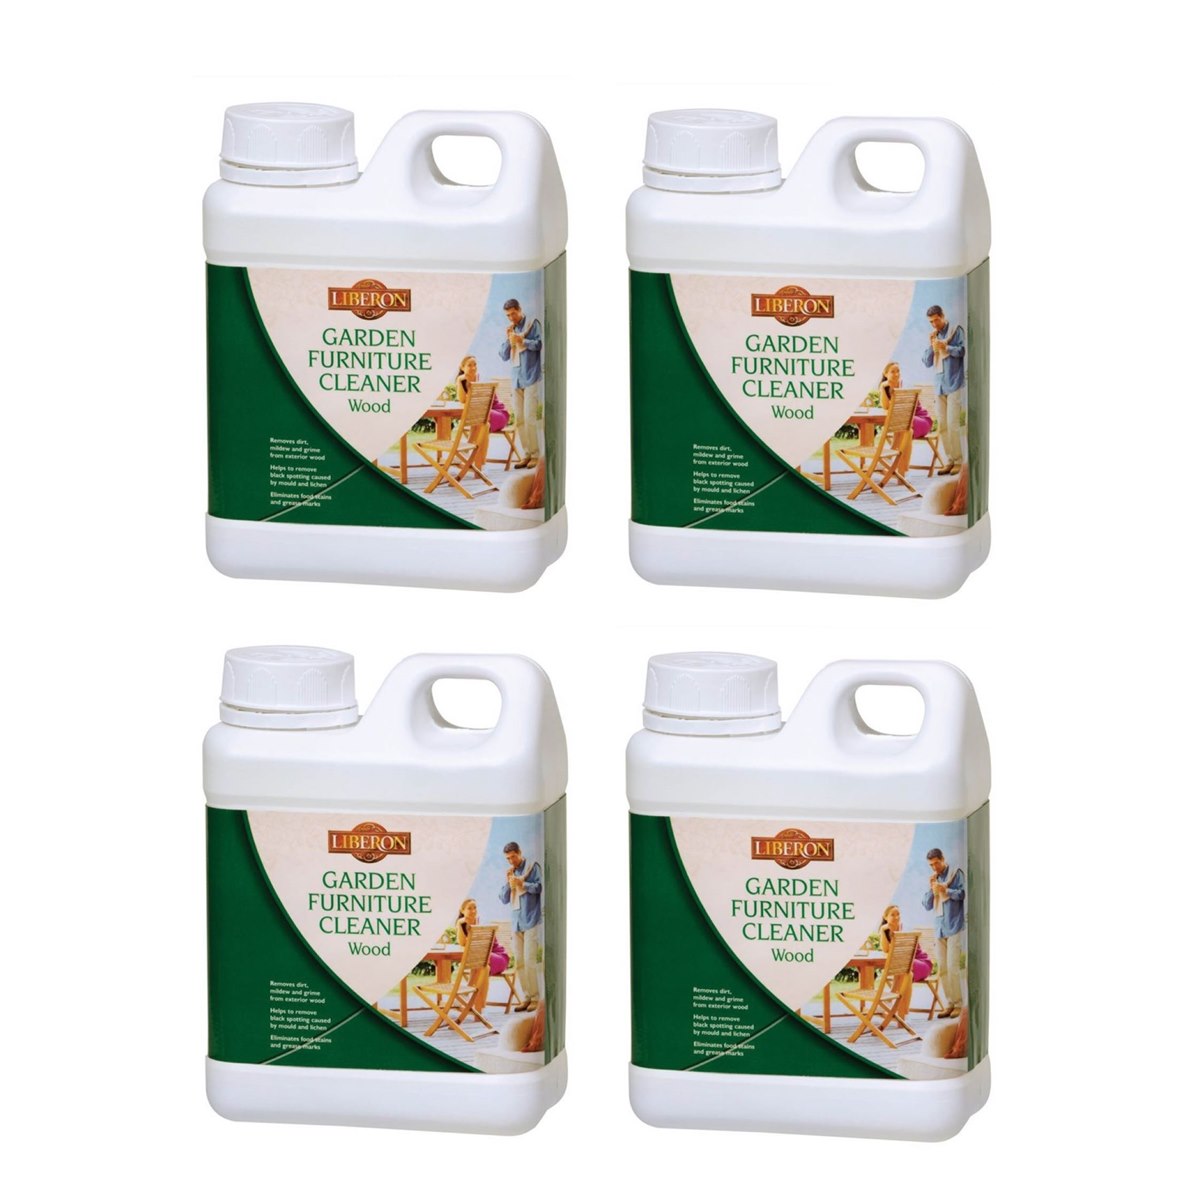 Case of 4 x Liberon Garden Furniture Cleaner for Wood 1 Litre